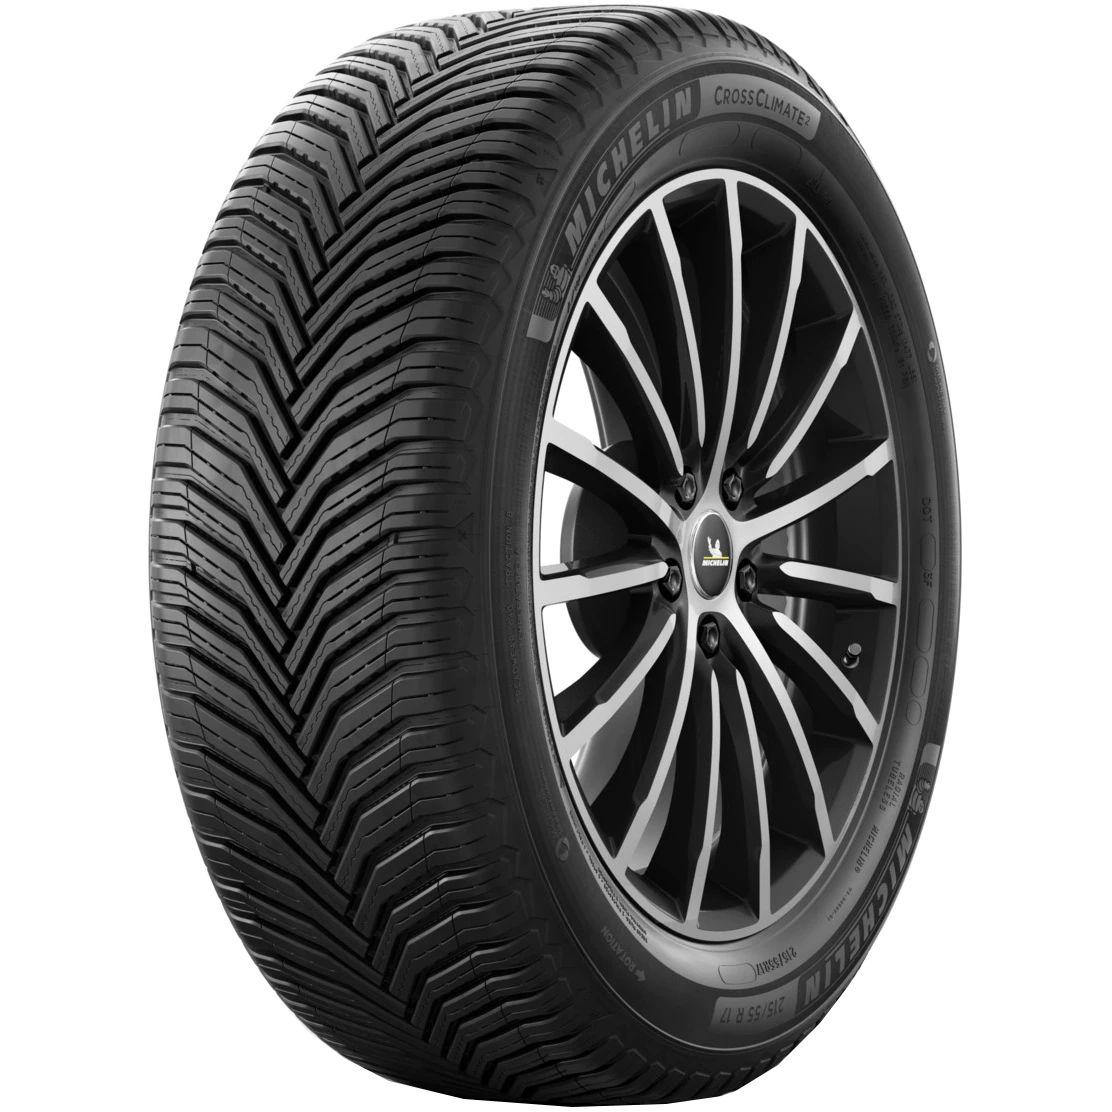 Anvelope all seasons MICHELIN CrossClimate2 M+S XL 215/65 R16 102V